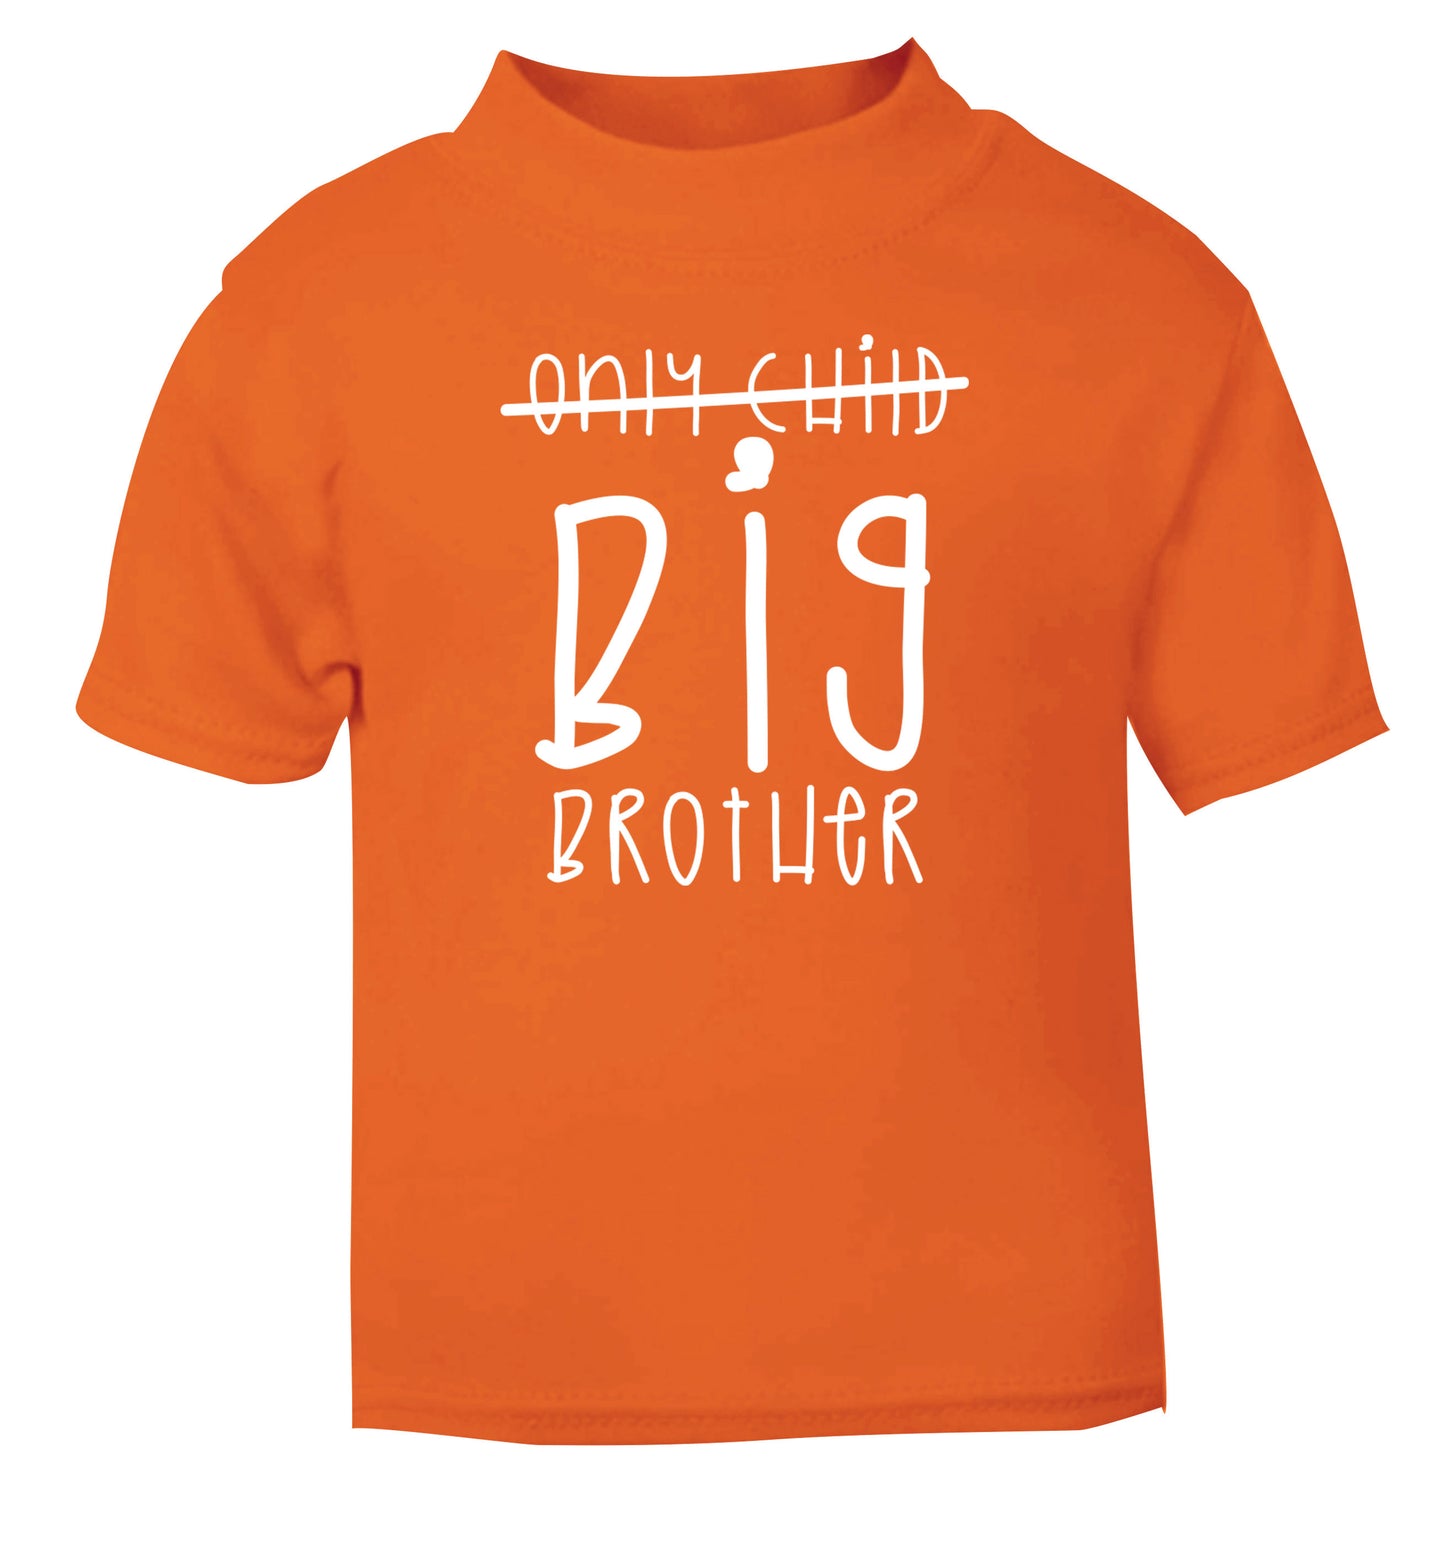 Only child big brother orange Baby Toddler Tshirt 2 Years